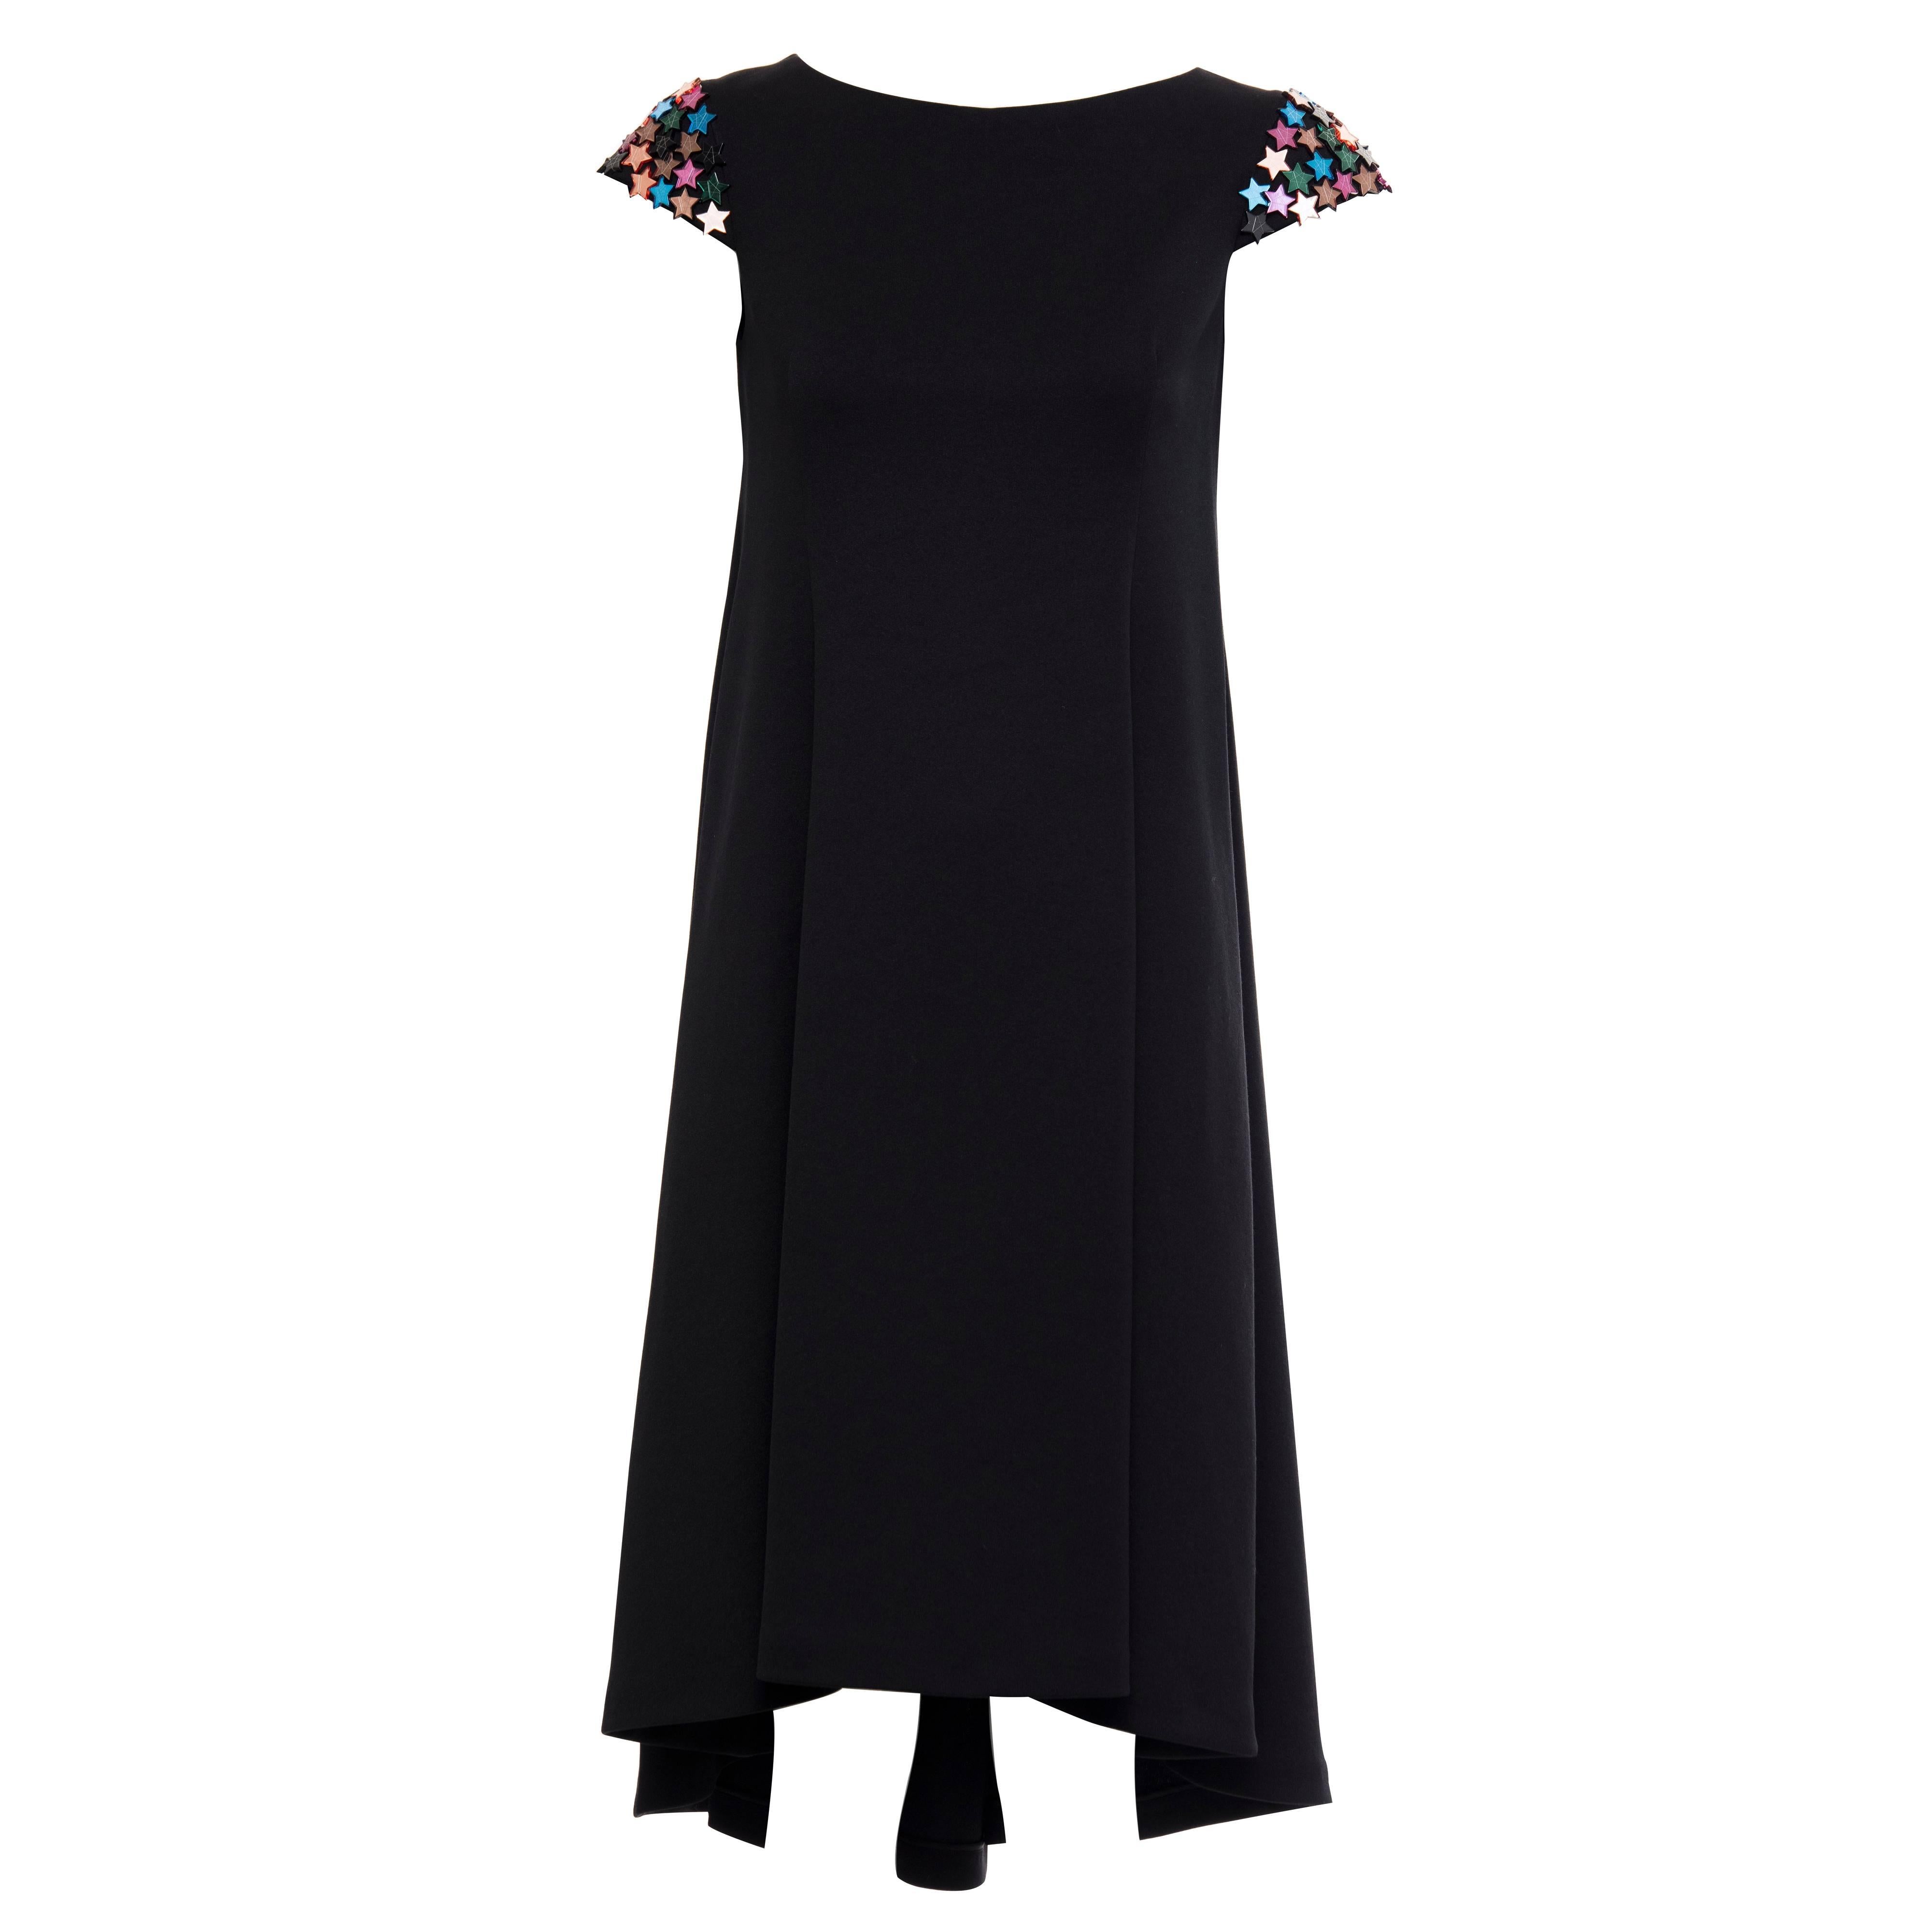 Yves Saint Laurent Black A - Line Dress With Mirrored Stars At Sleeve For Sale